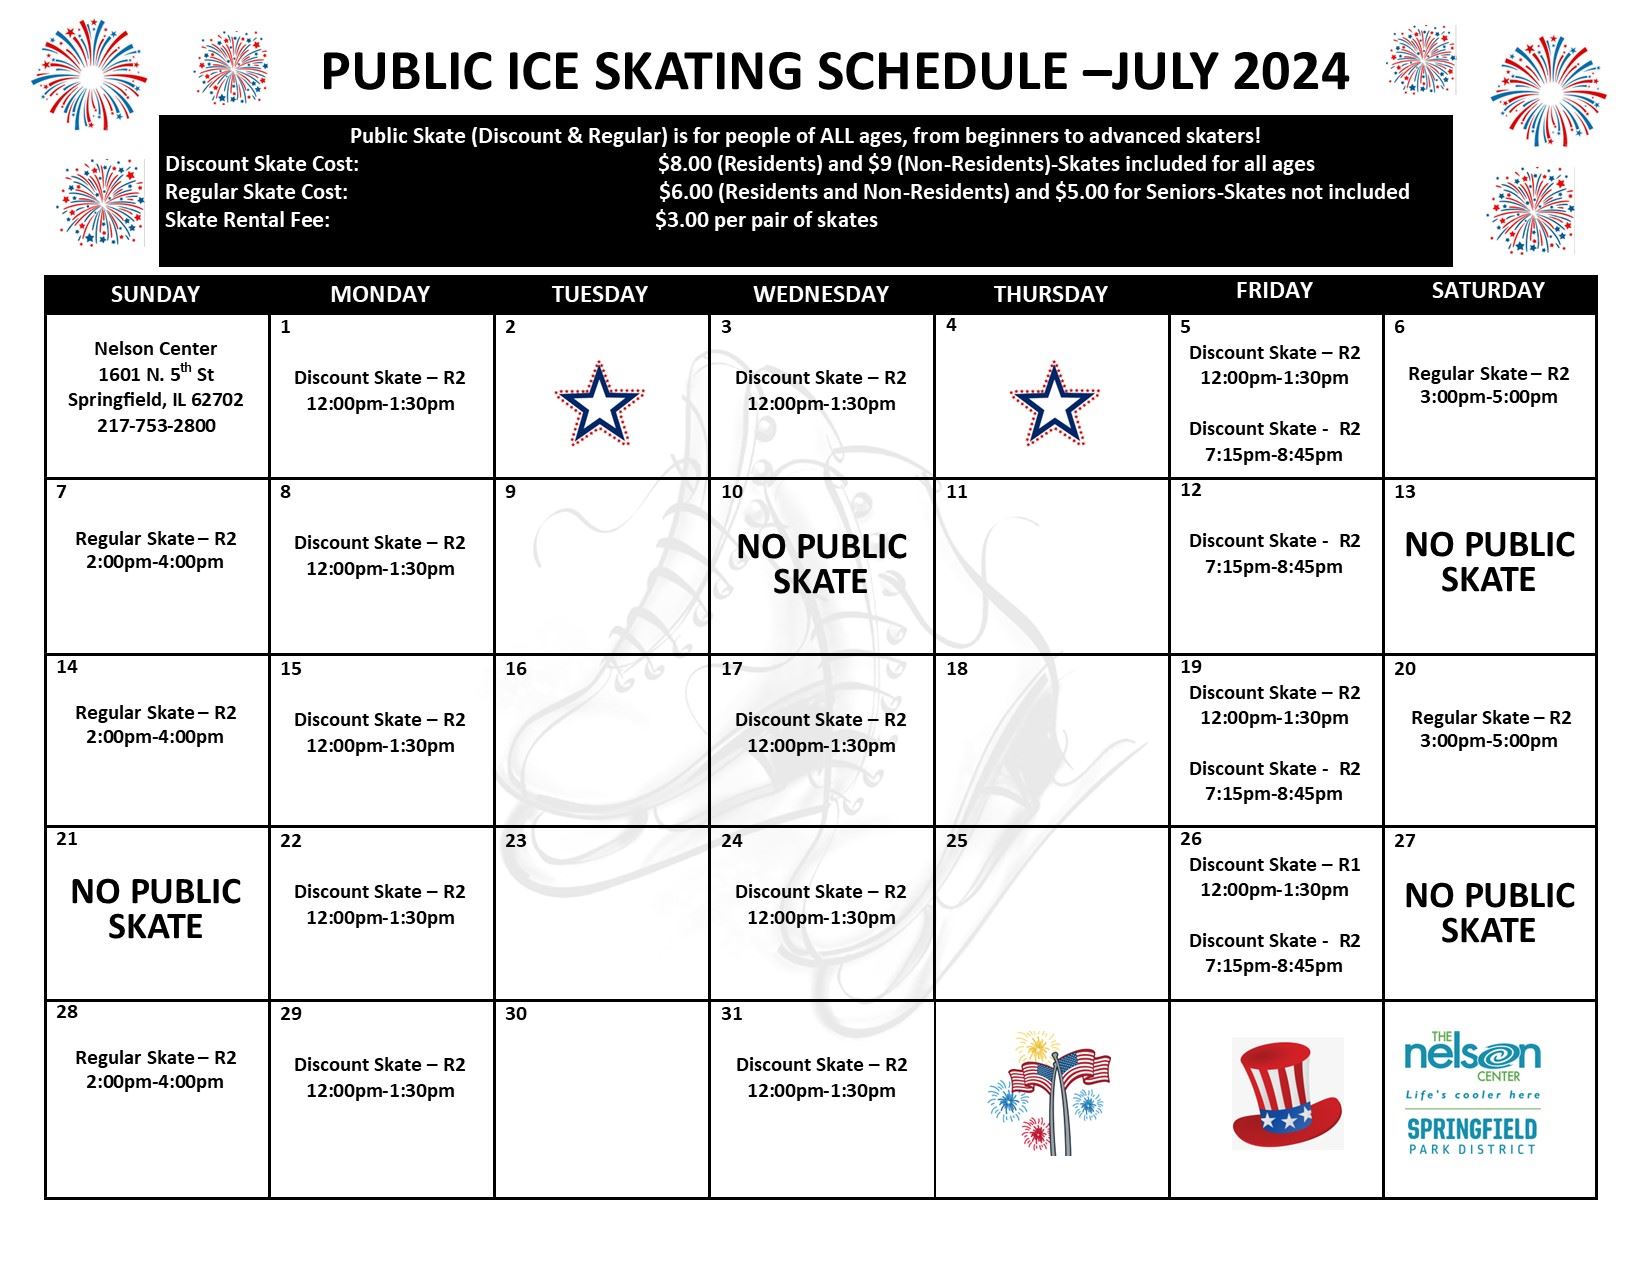 July 2024 Public Ice Skating Schedule